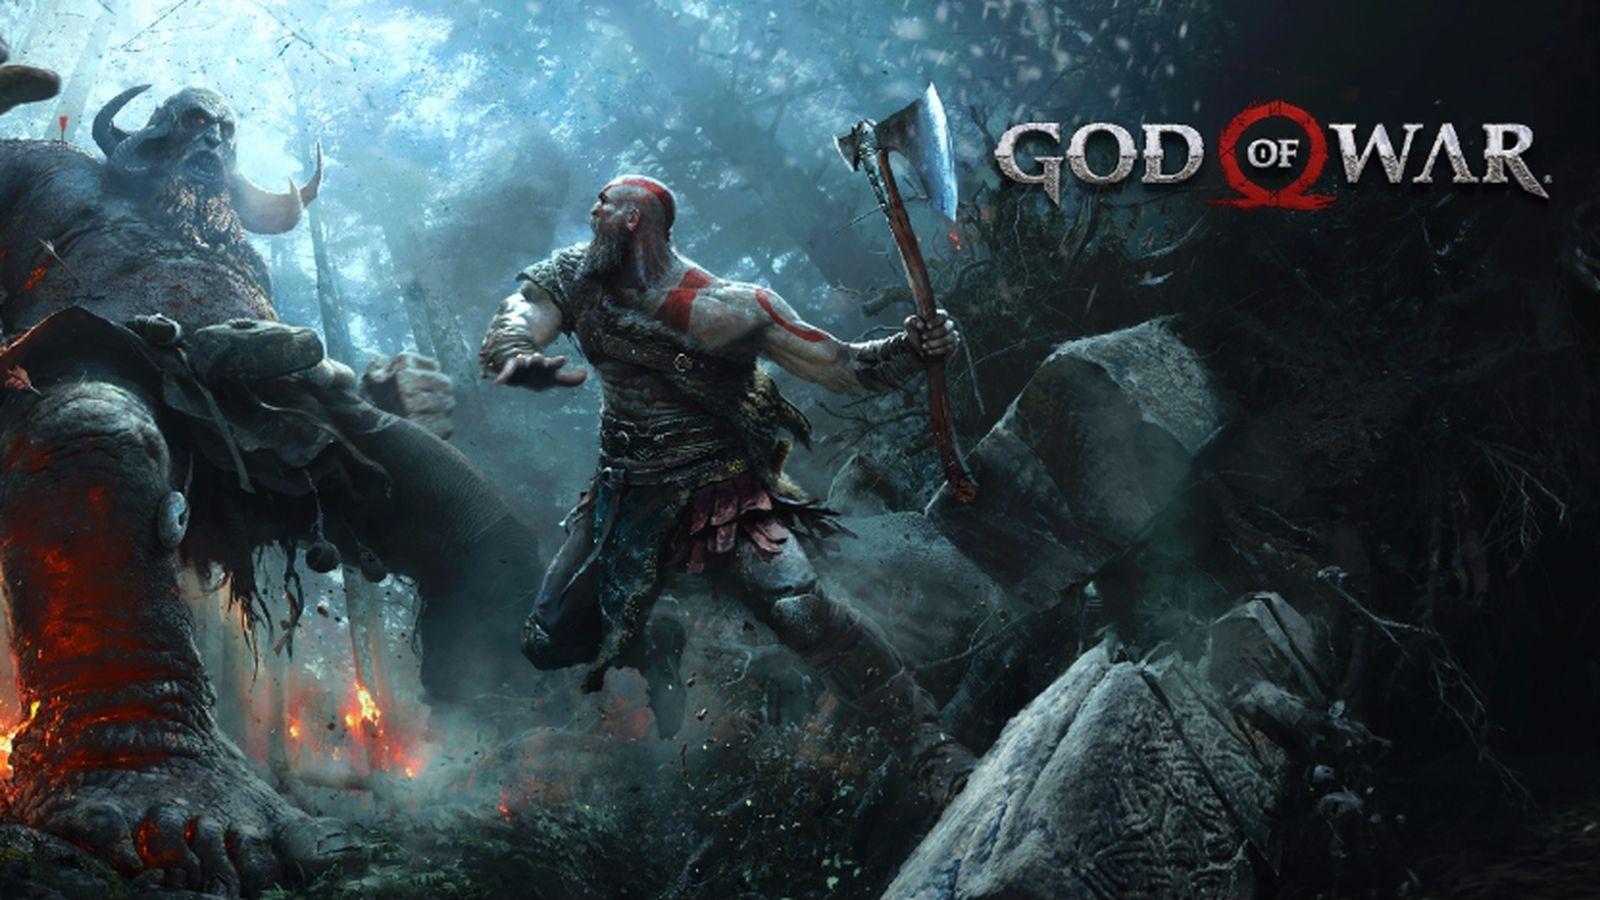 God of War (2018) HD Wallpaper and Background Image